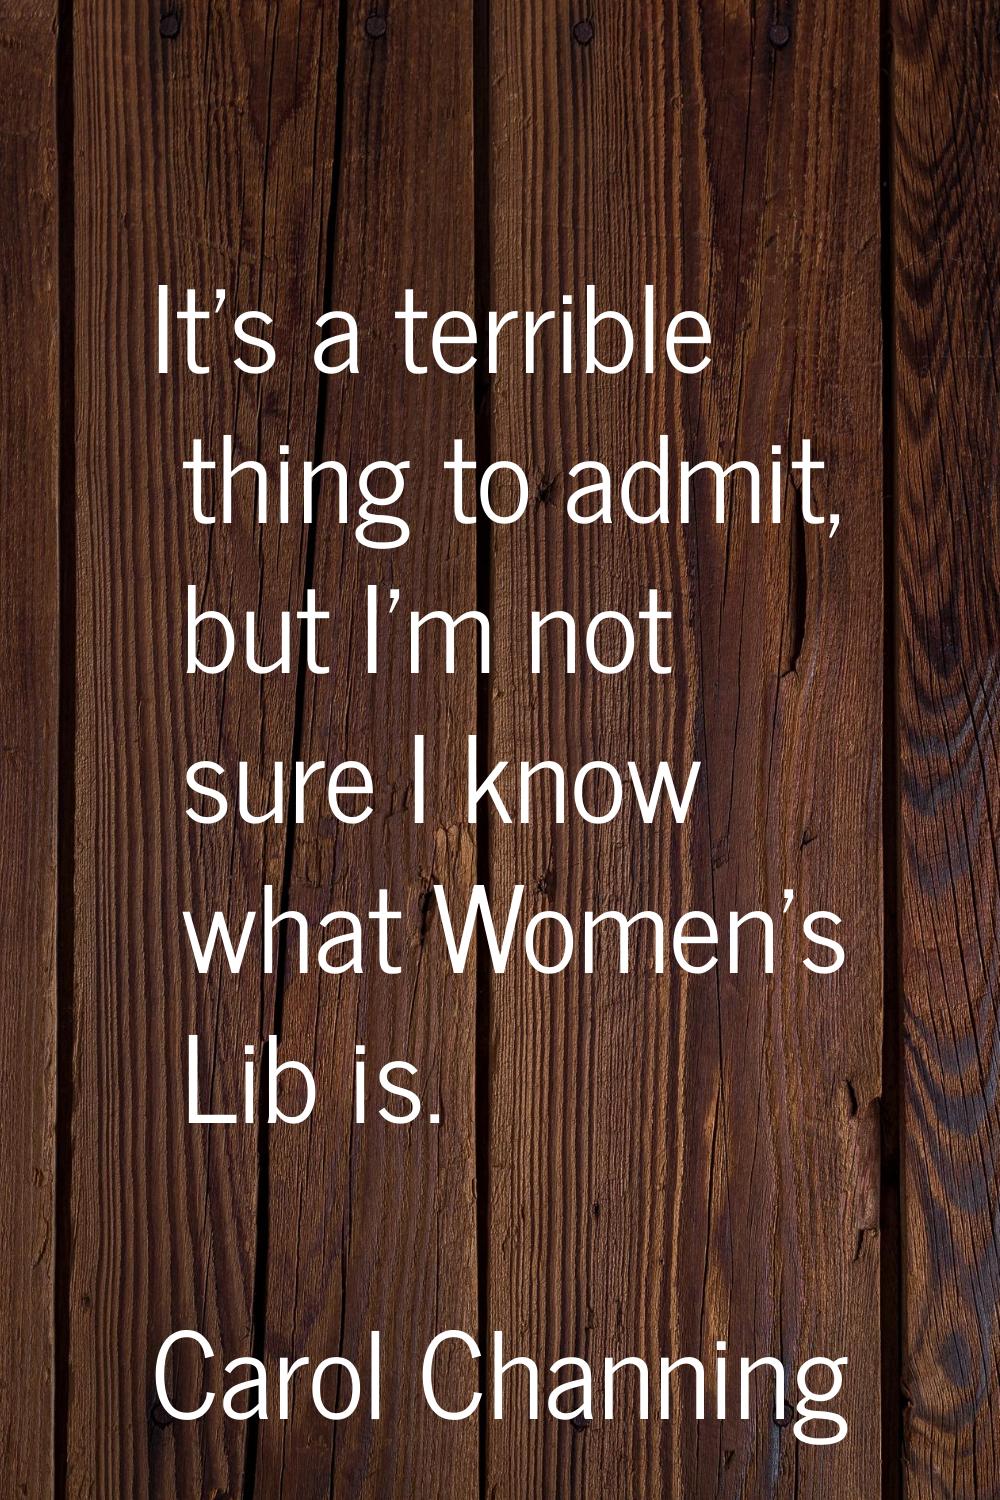 It's a terrible thing to admit, but I'm not sure I know what Women's Lib is.